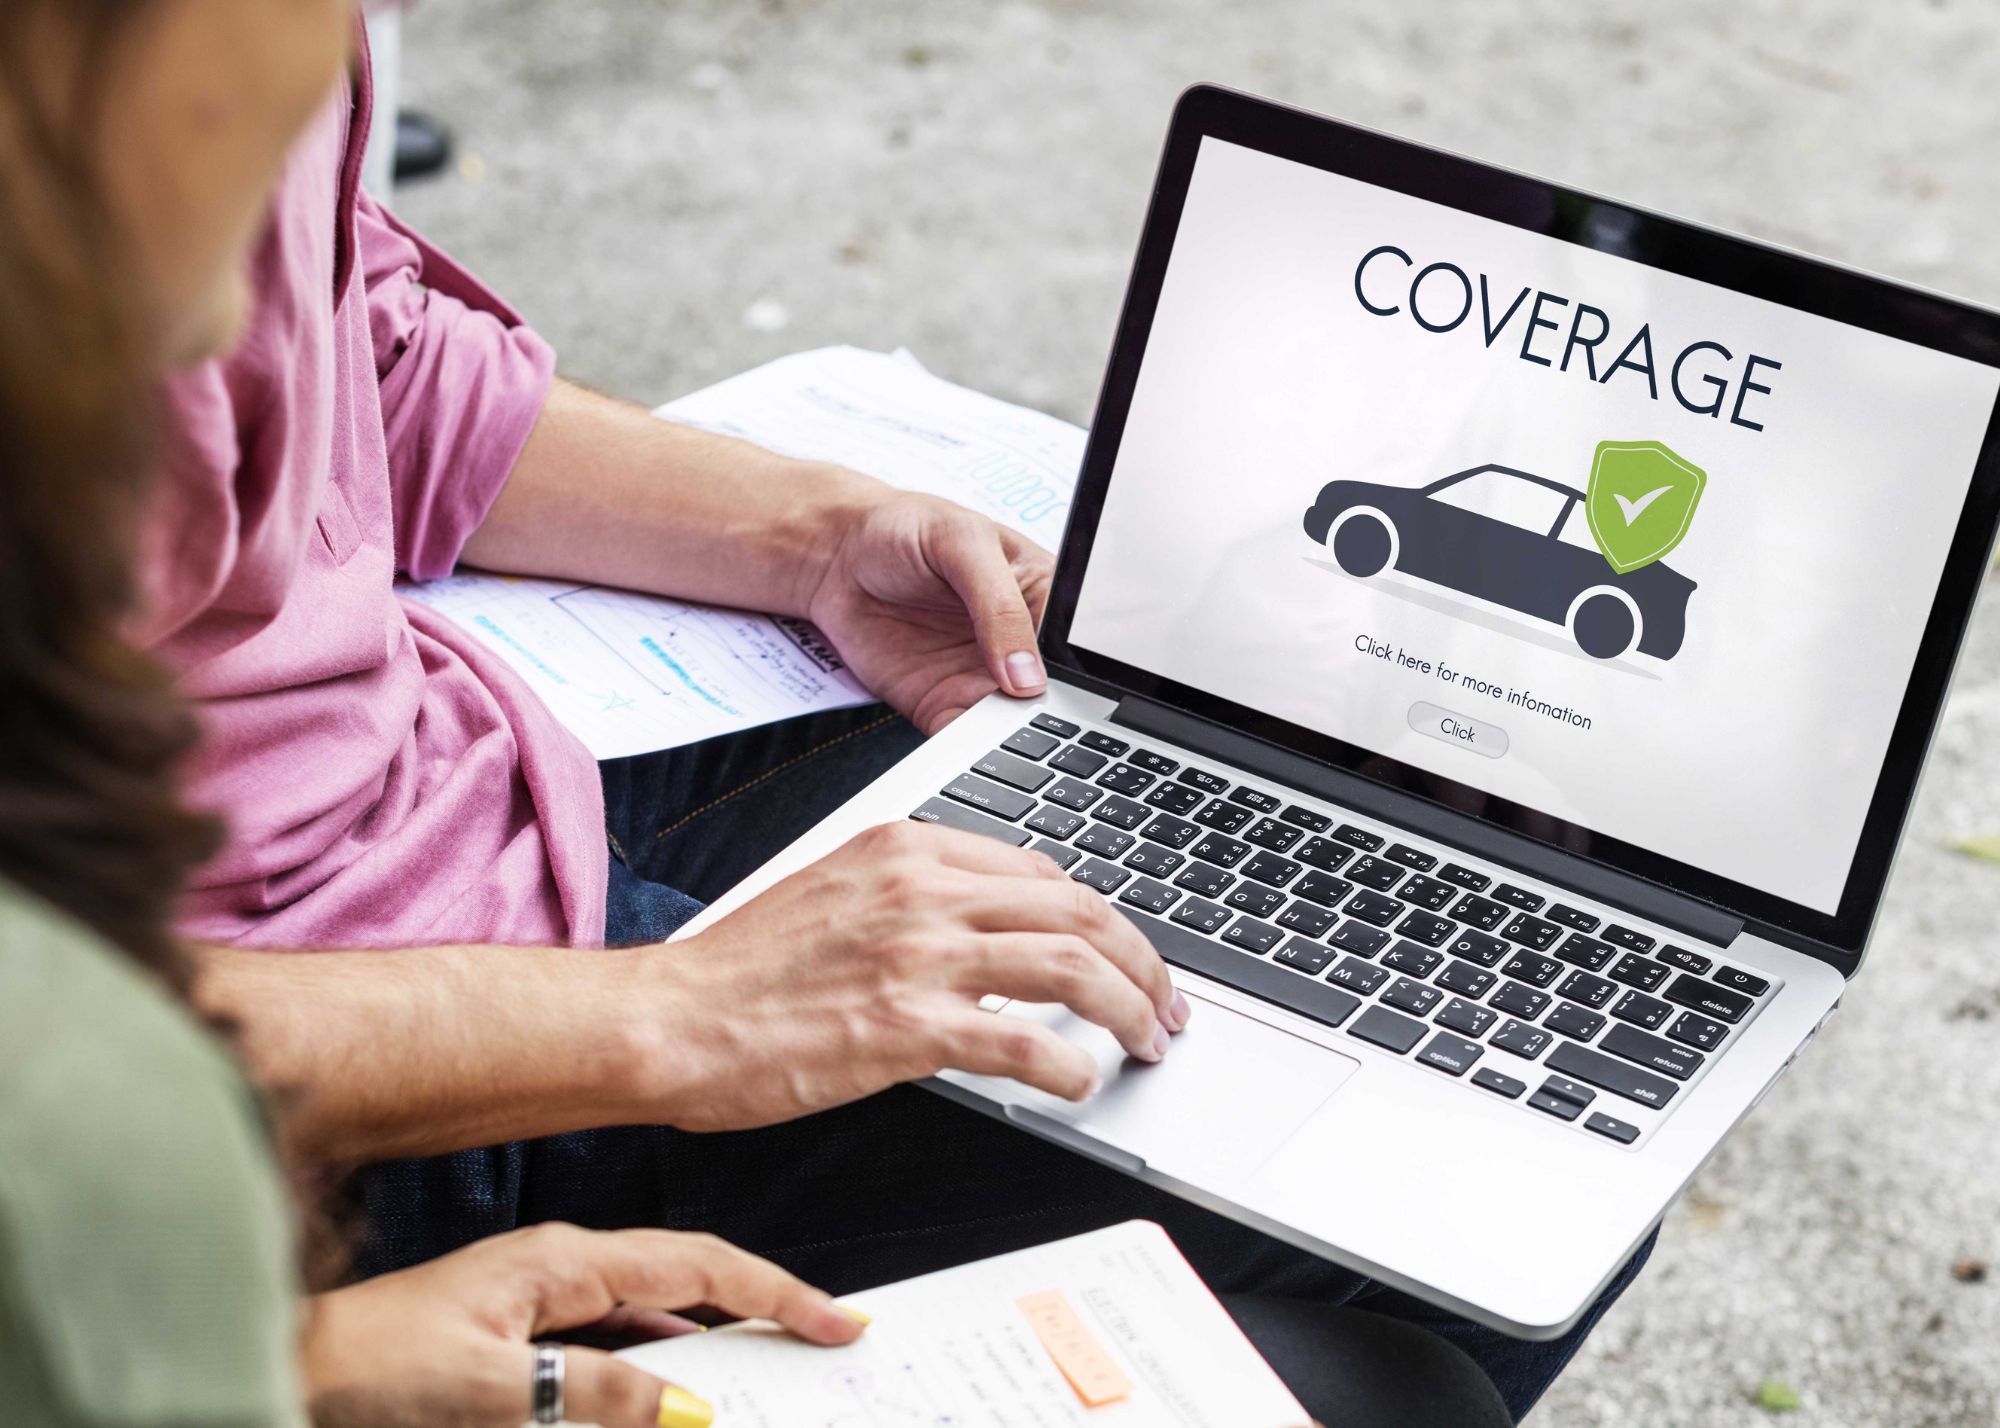 SR22 car coverage is a type of auto insurance required for high-risk drivers to maintain their driving privileges. It is commonly used in St. Petersburg, FL to fulfill legal requirements.